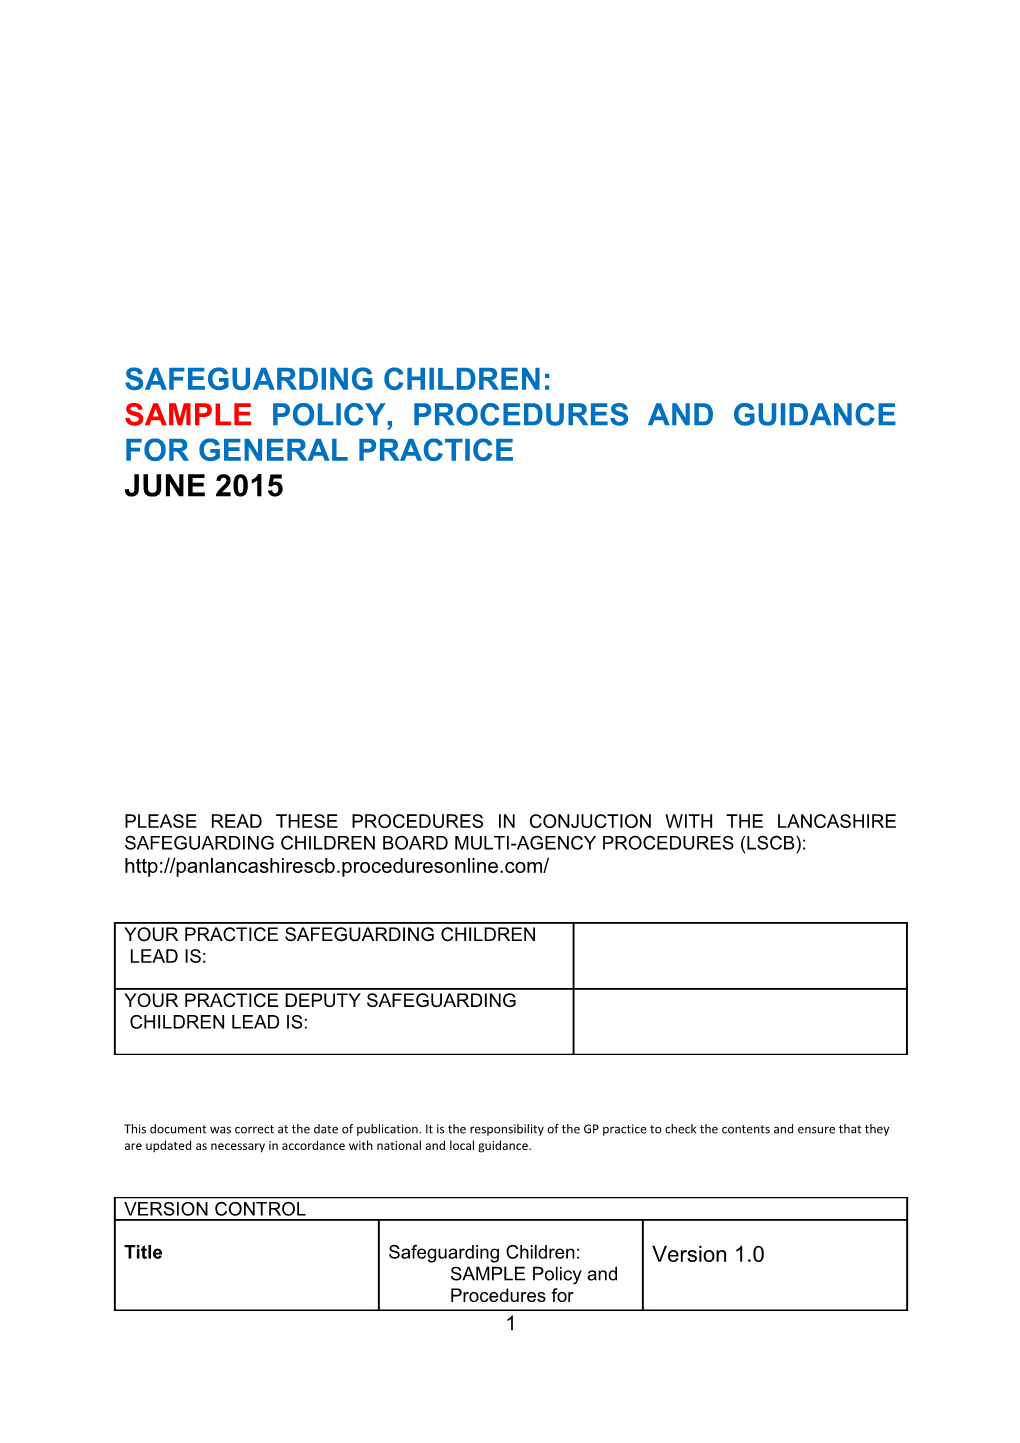 SAMPLE POLICY, Procedures and Guidancefor General Practice